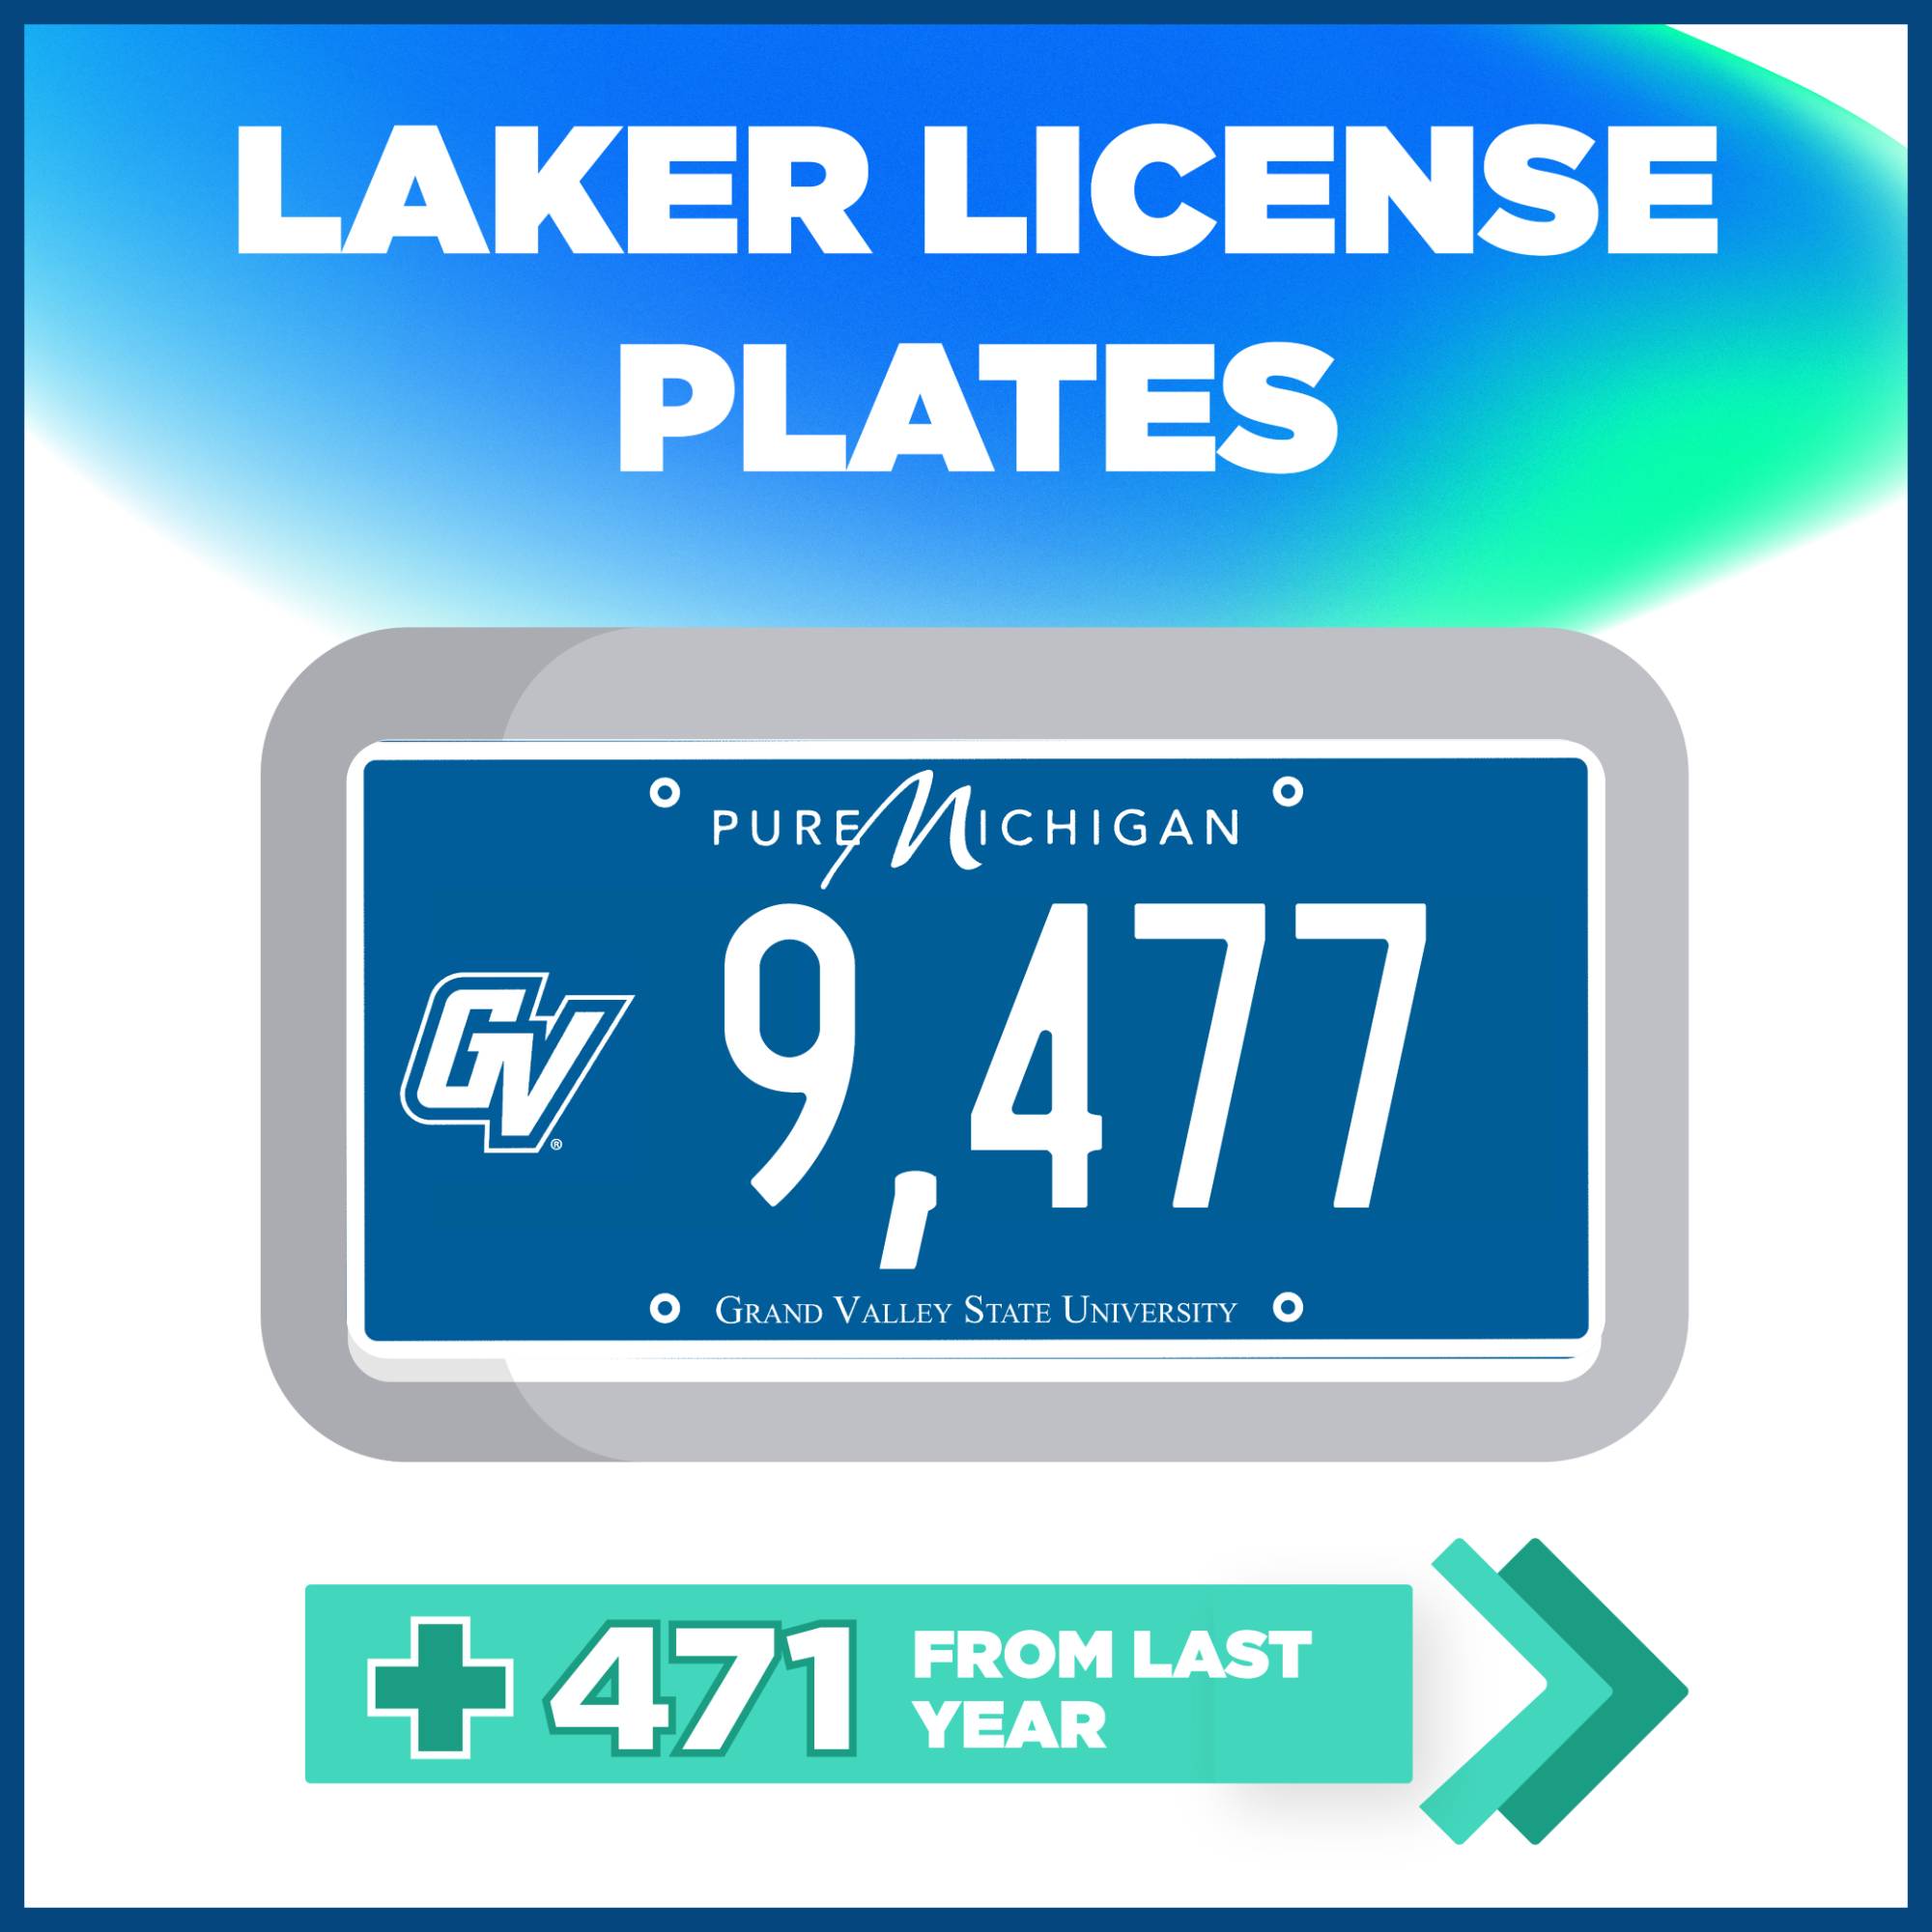 There are a total of 9,477 Laker License Plates. This number increased by 471 plates in the past year.